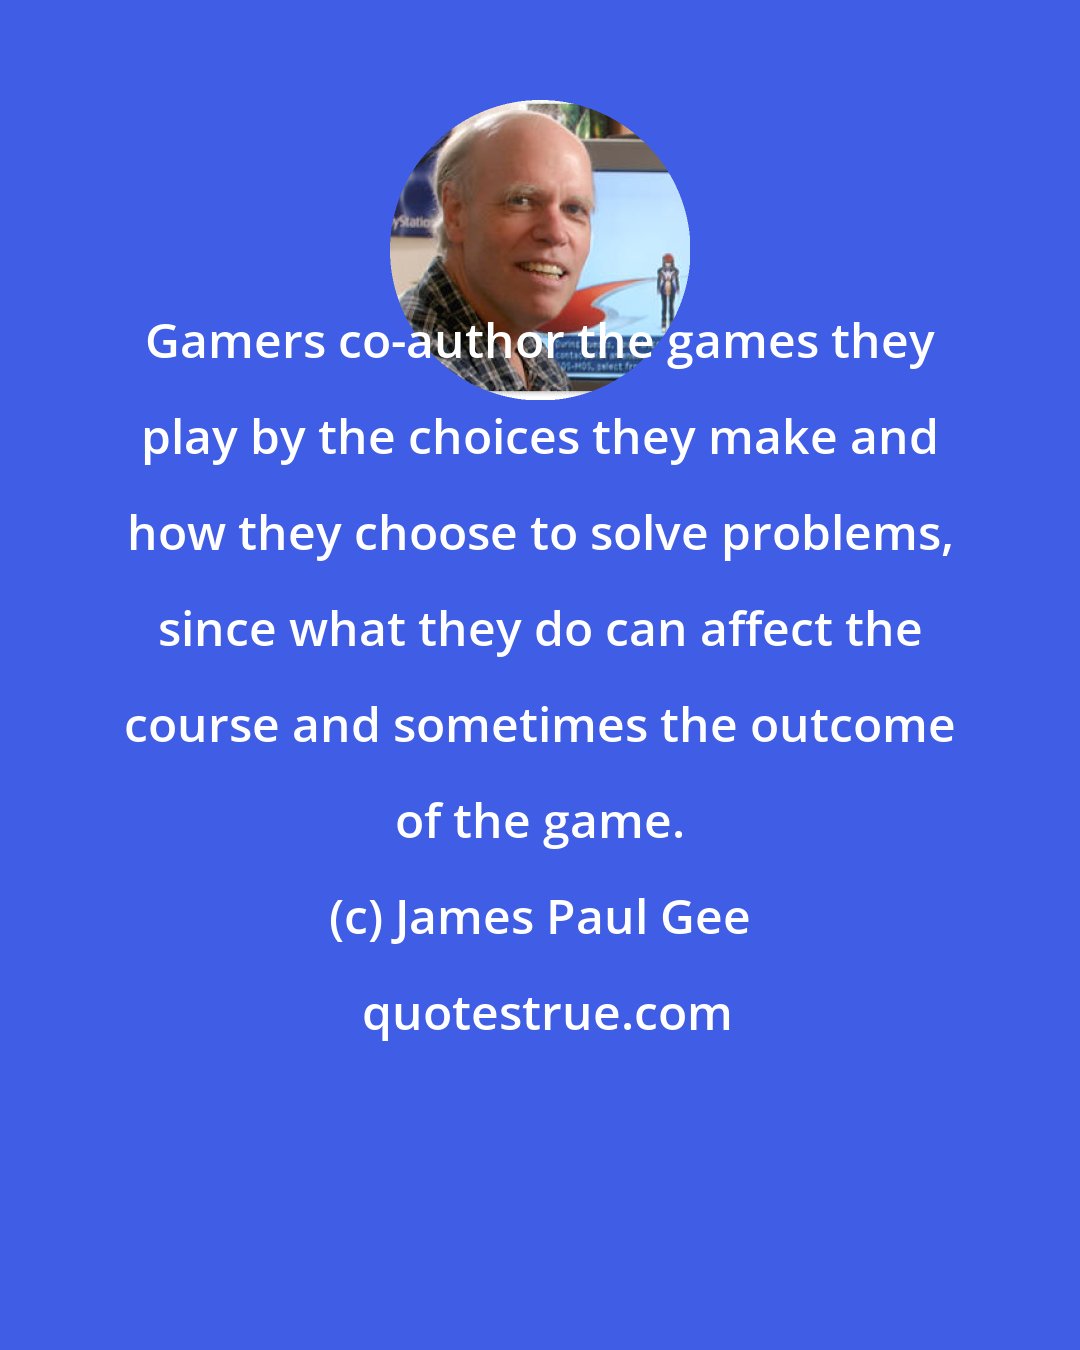 James Paul Gee: Gamers co-author the games they play by the choices they make and how they choose to solve problems, since what they do can affect the course and sometimes the outcome of the game.